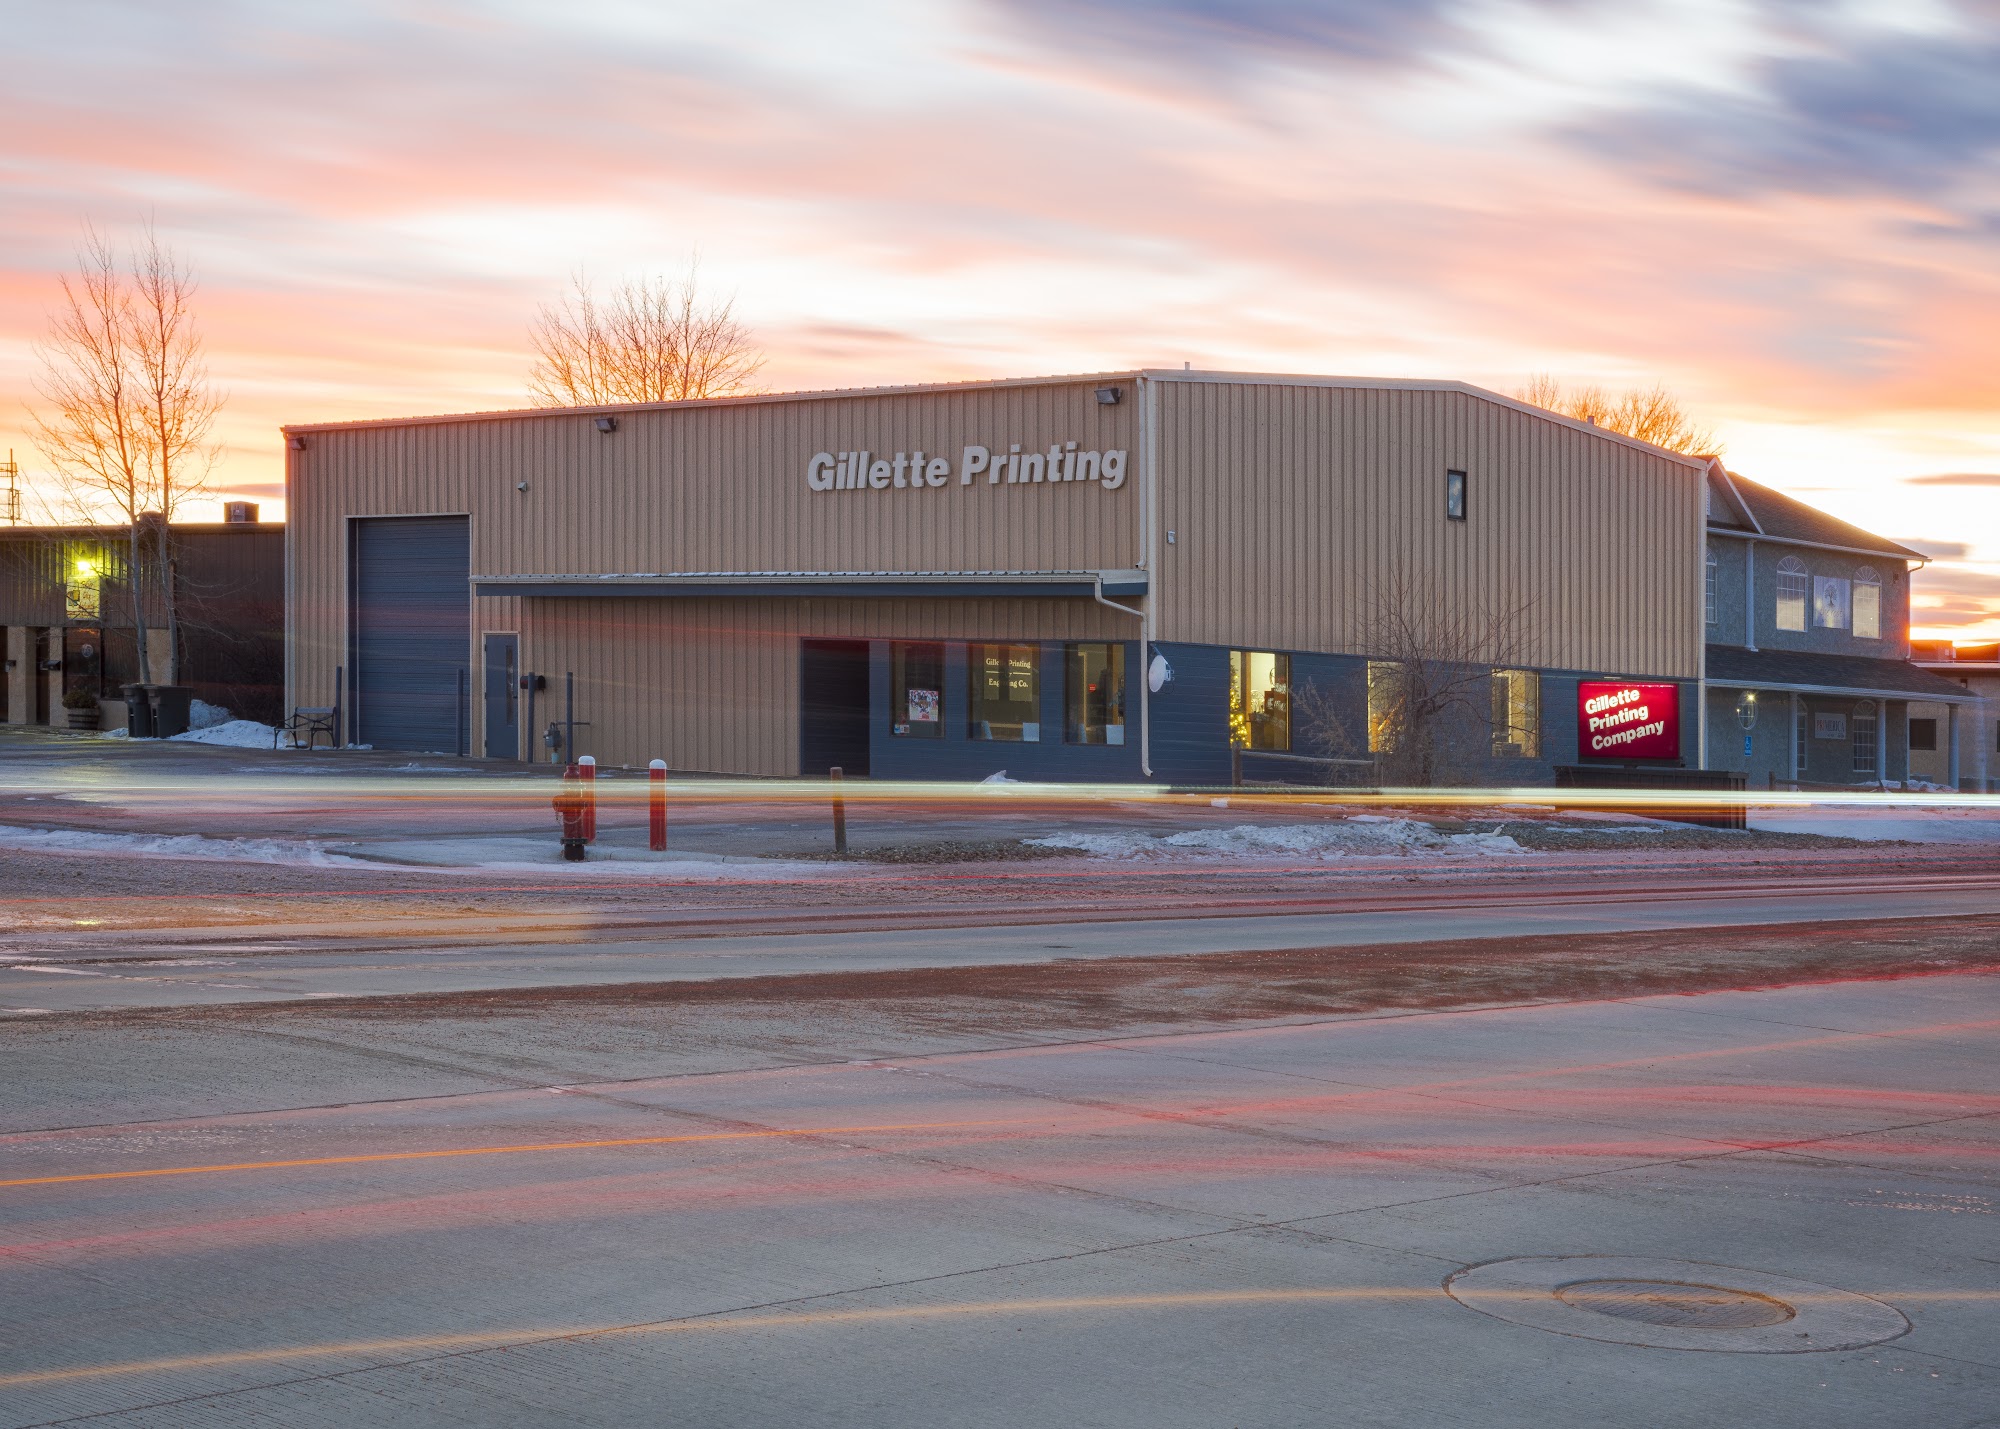 Gillette Printing Co Inc